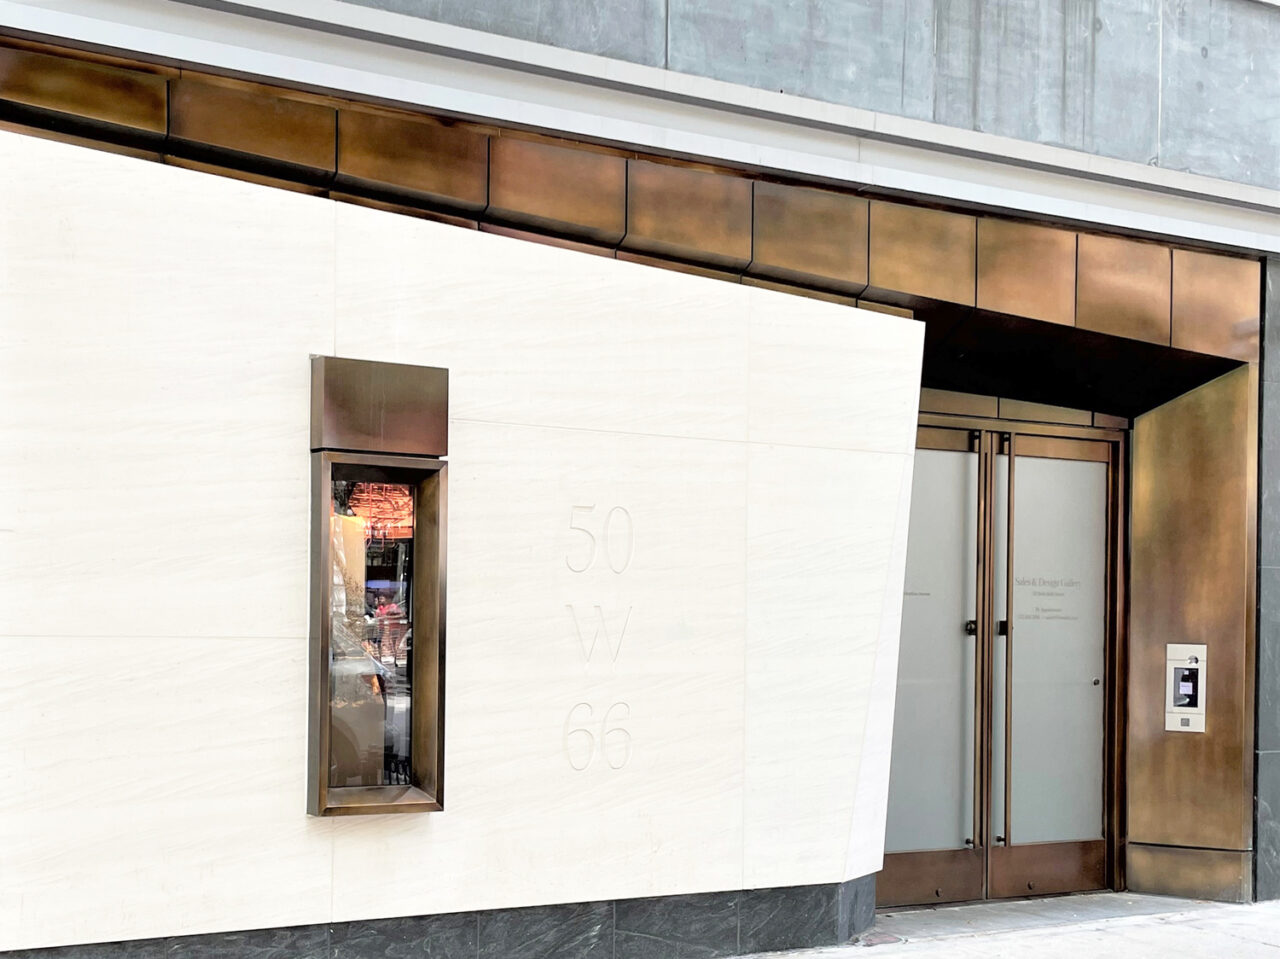 Exterior image of Snohetta sales office at 36 West 66th St, New York, New York.